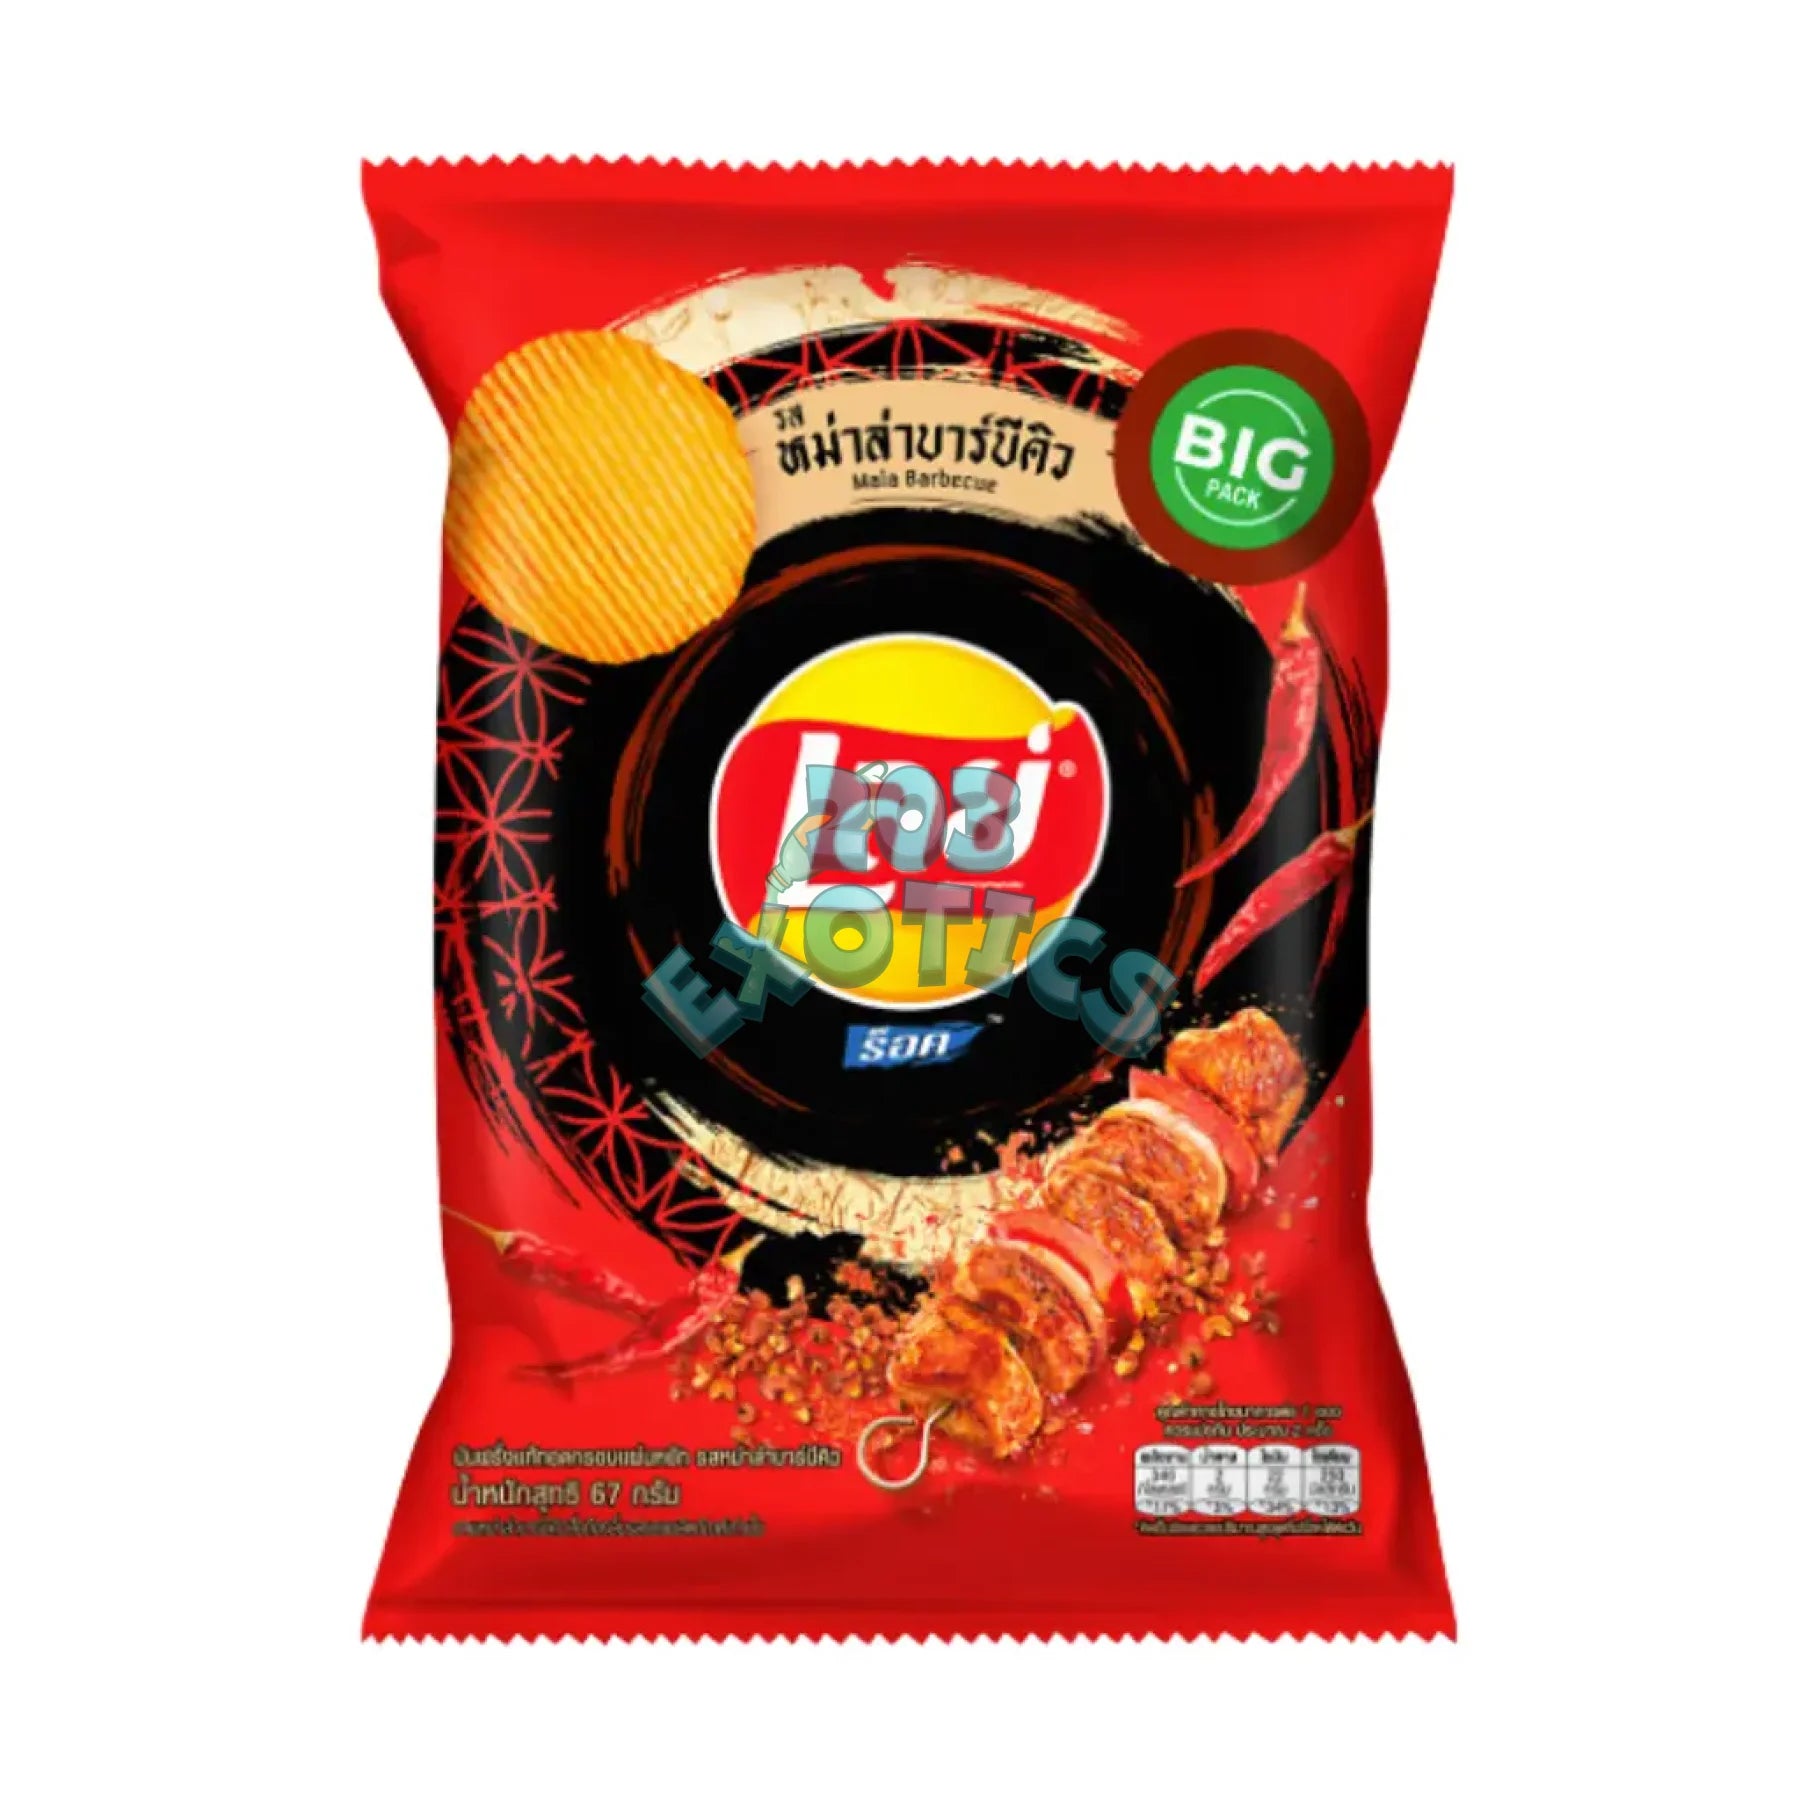 Lays Spicy Mala Barbecue (40G)